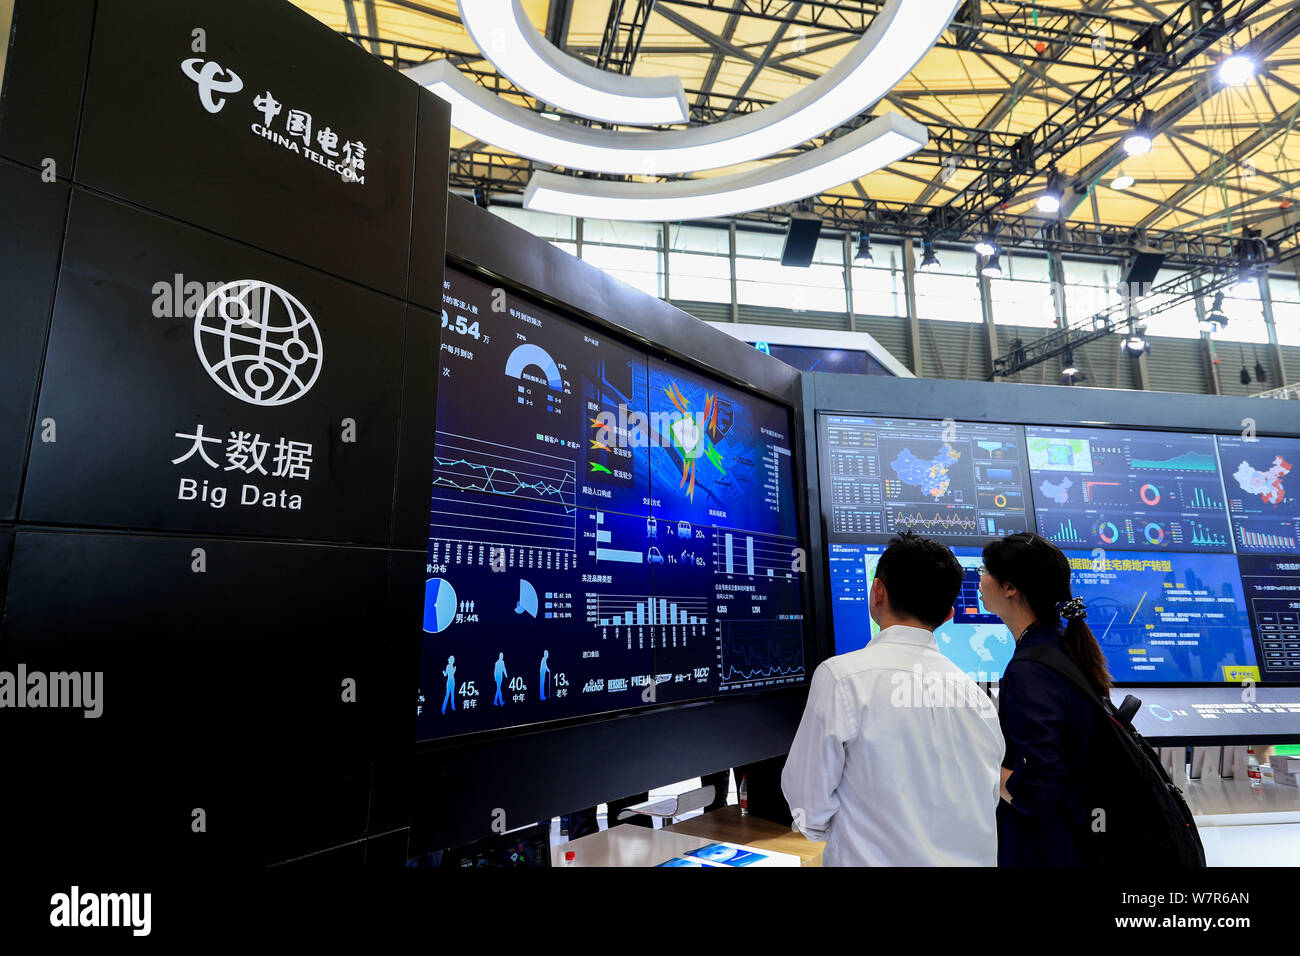 People visit the stand of China Telecom during the 2017 Mobile World Congress (MWC) in Shanghai, China, 28 June 2017.   The Mobile World Congress 2017 Stock Photo